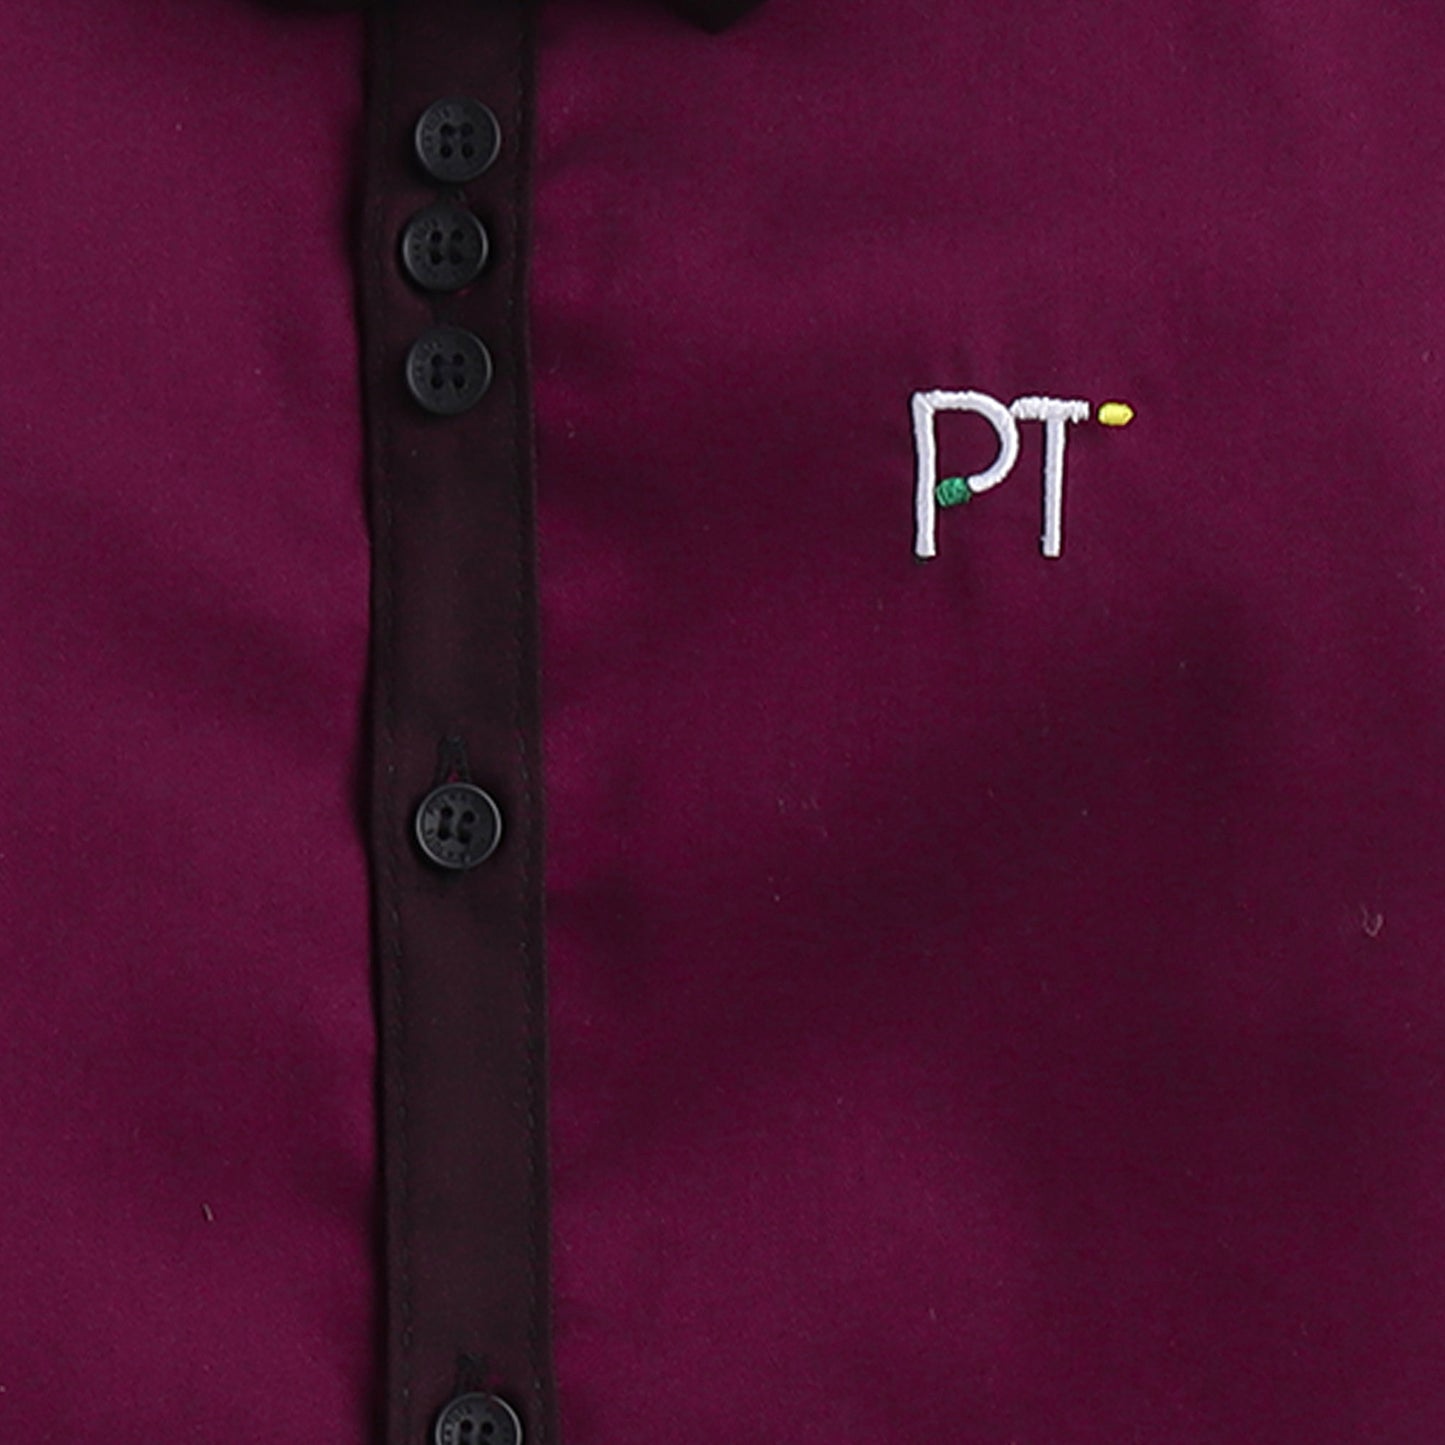 Polka Tots Full Sleeve Party Wear Reverse Collar Placket With Bow Tie Shirt - Maroon